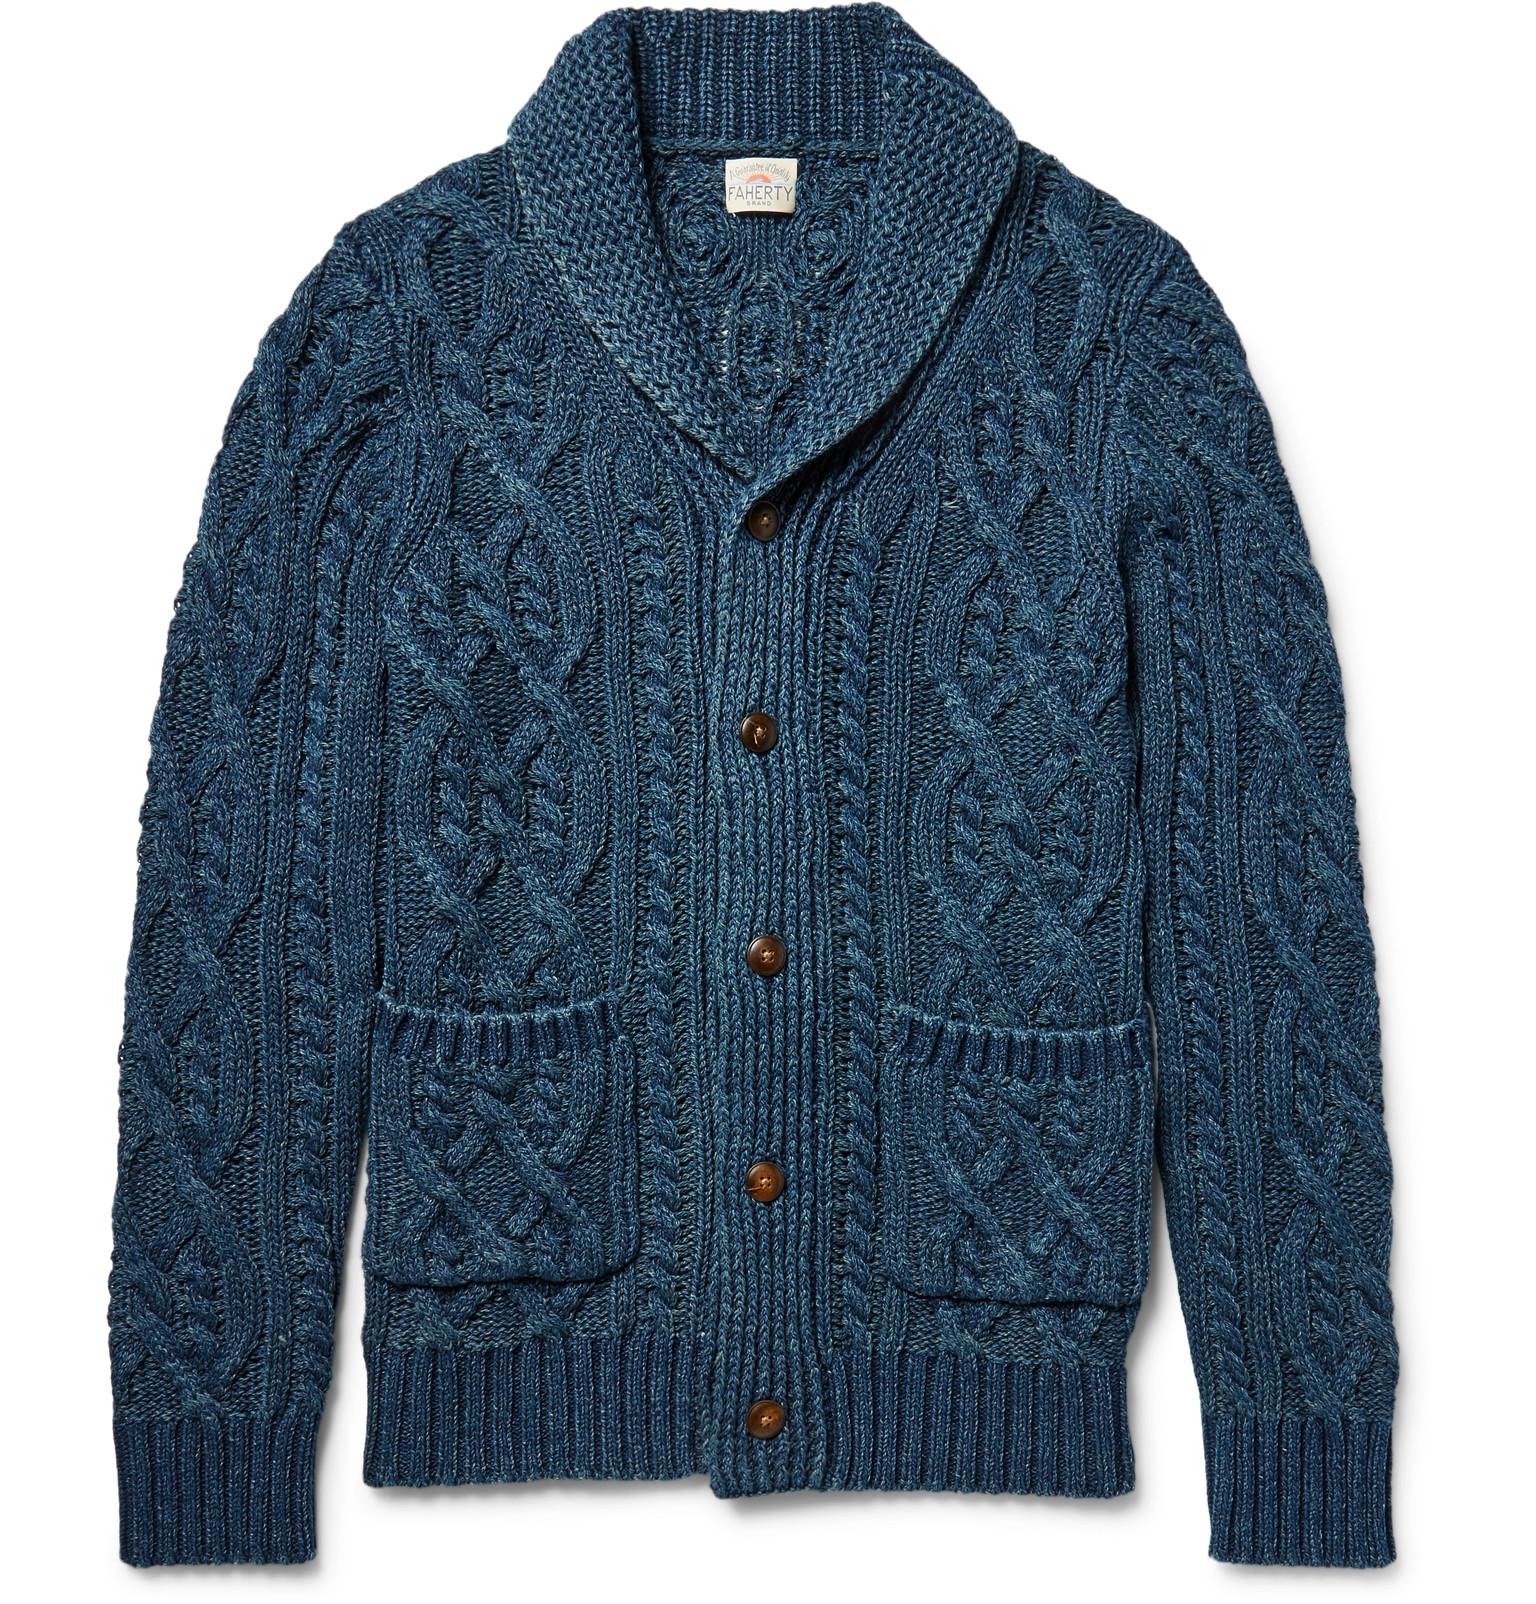 Faherty Brand Shawl-collar Indigo-dyed Cable-knit Cotton Cardigan in ...